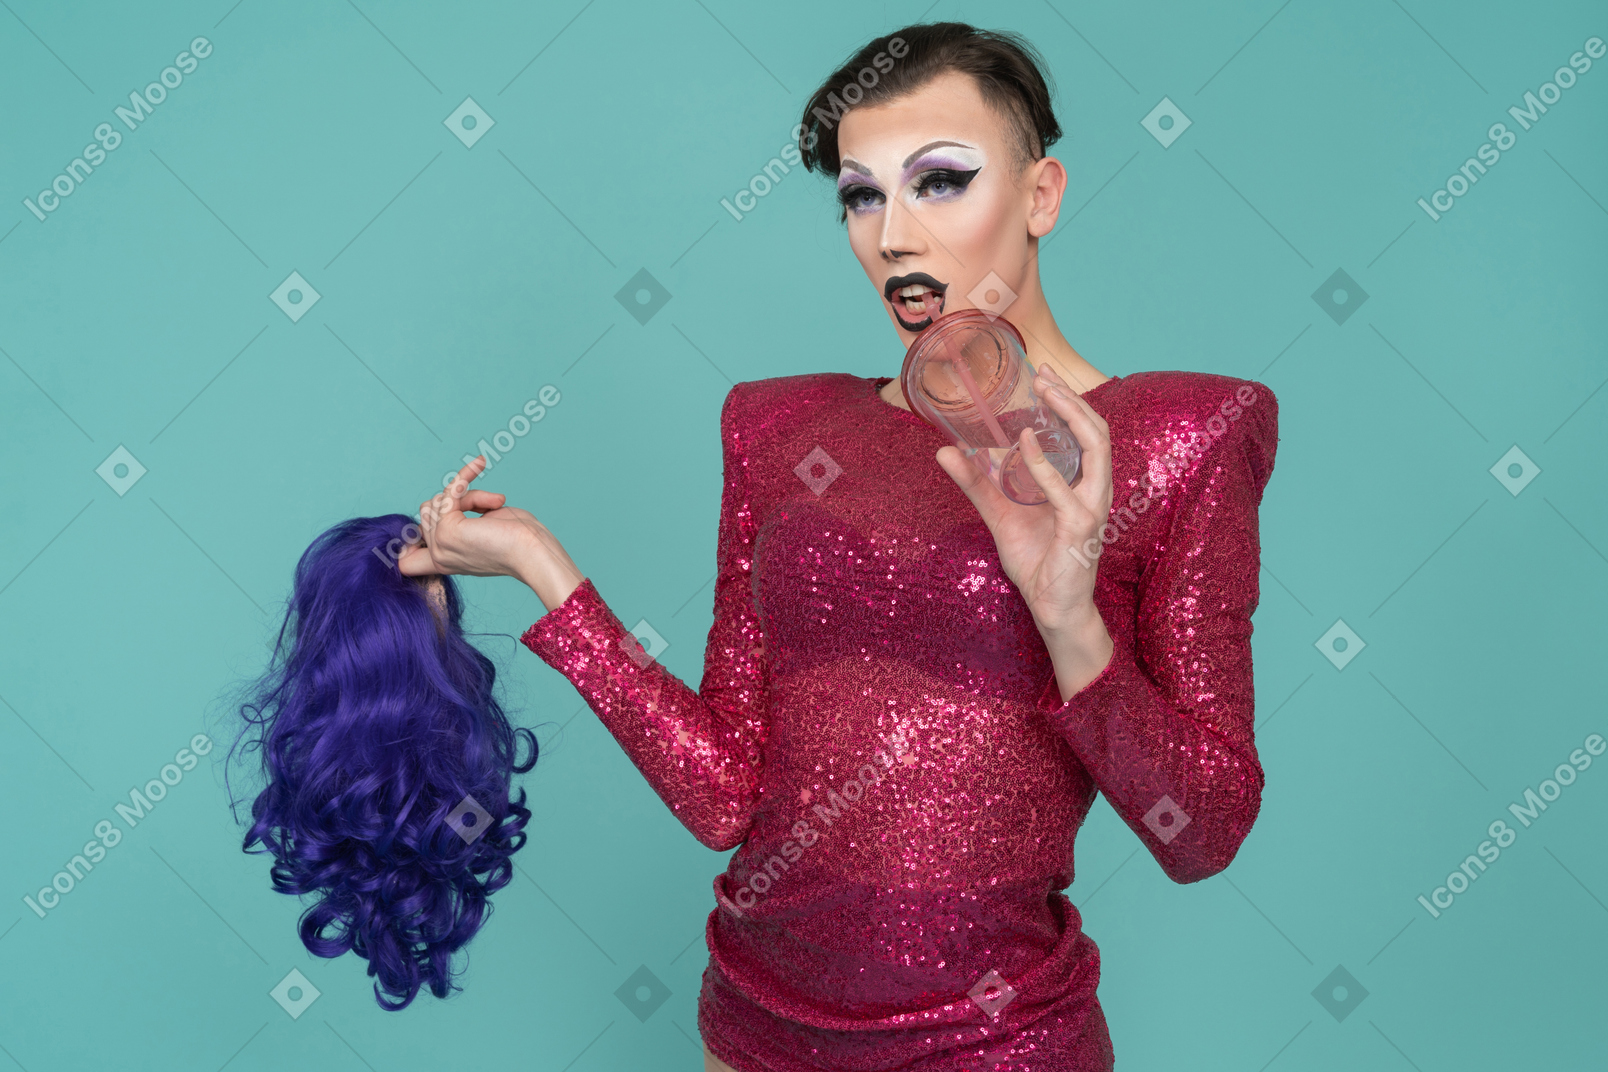 Close-up of a drag queen in pink dress drinking through straw & holding wig